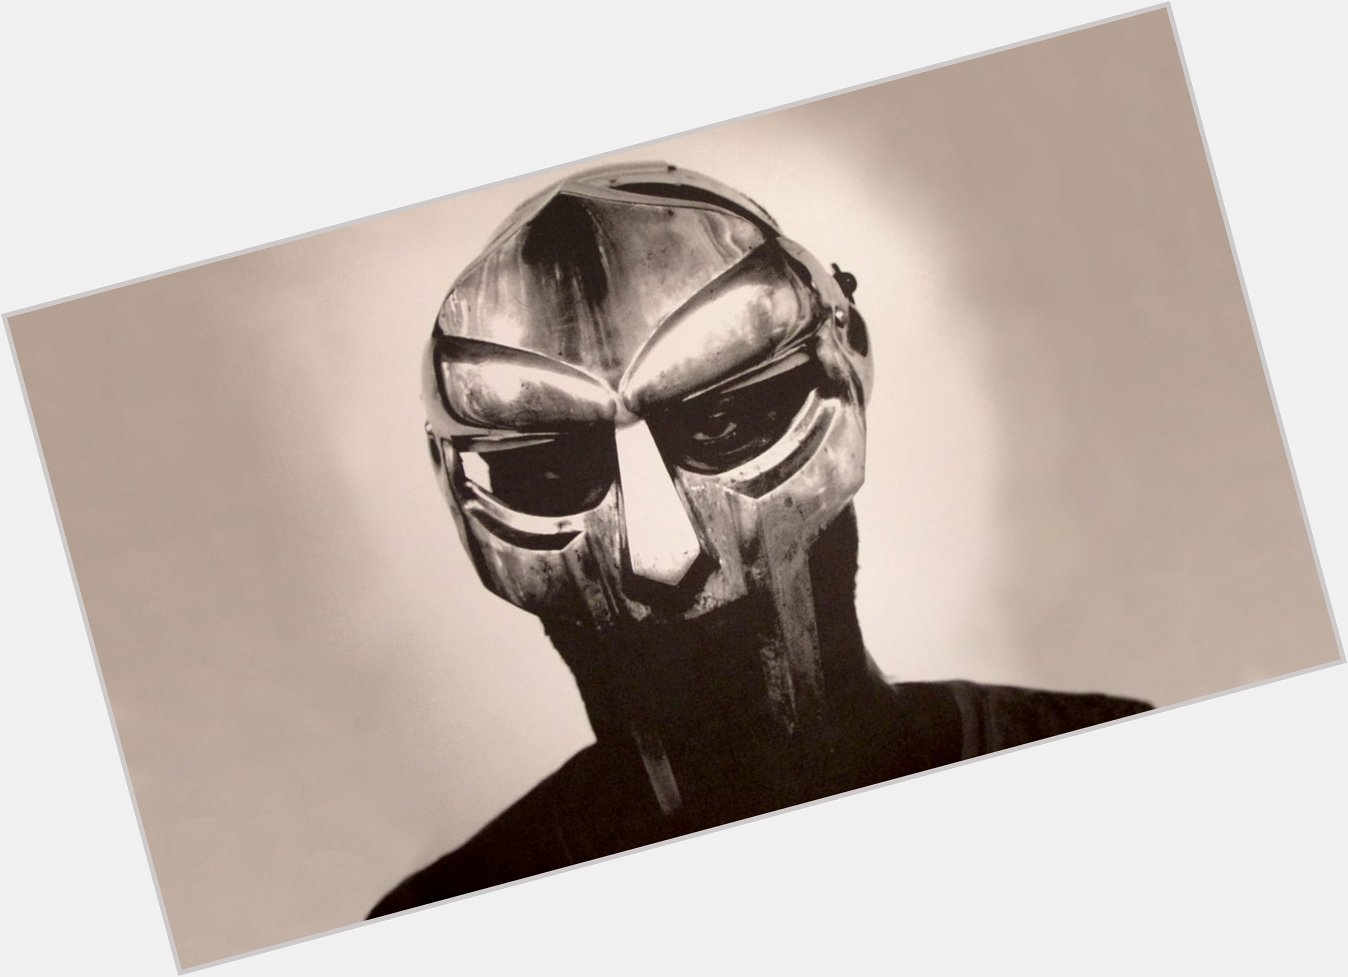 Happy birthday to MF Doom! What\s your favorite album that he\s done? 